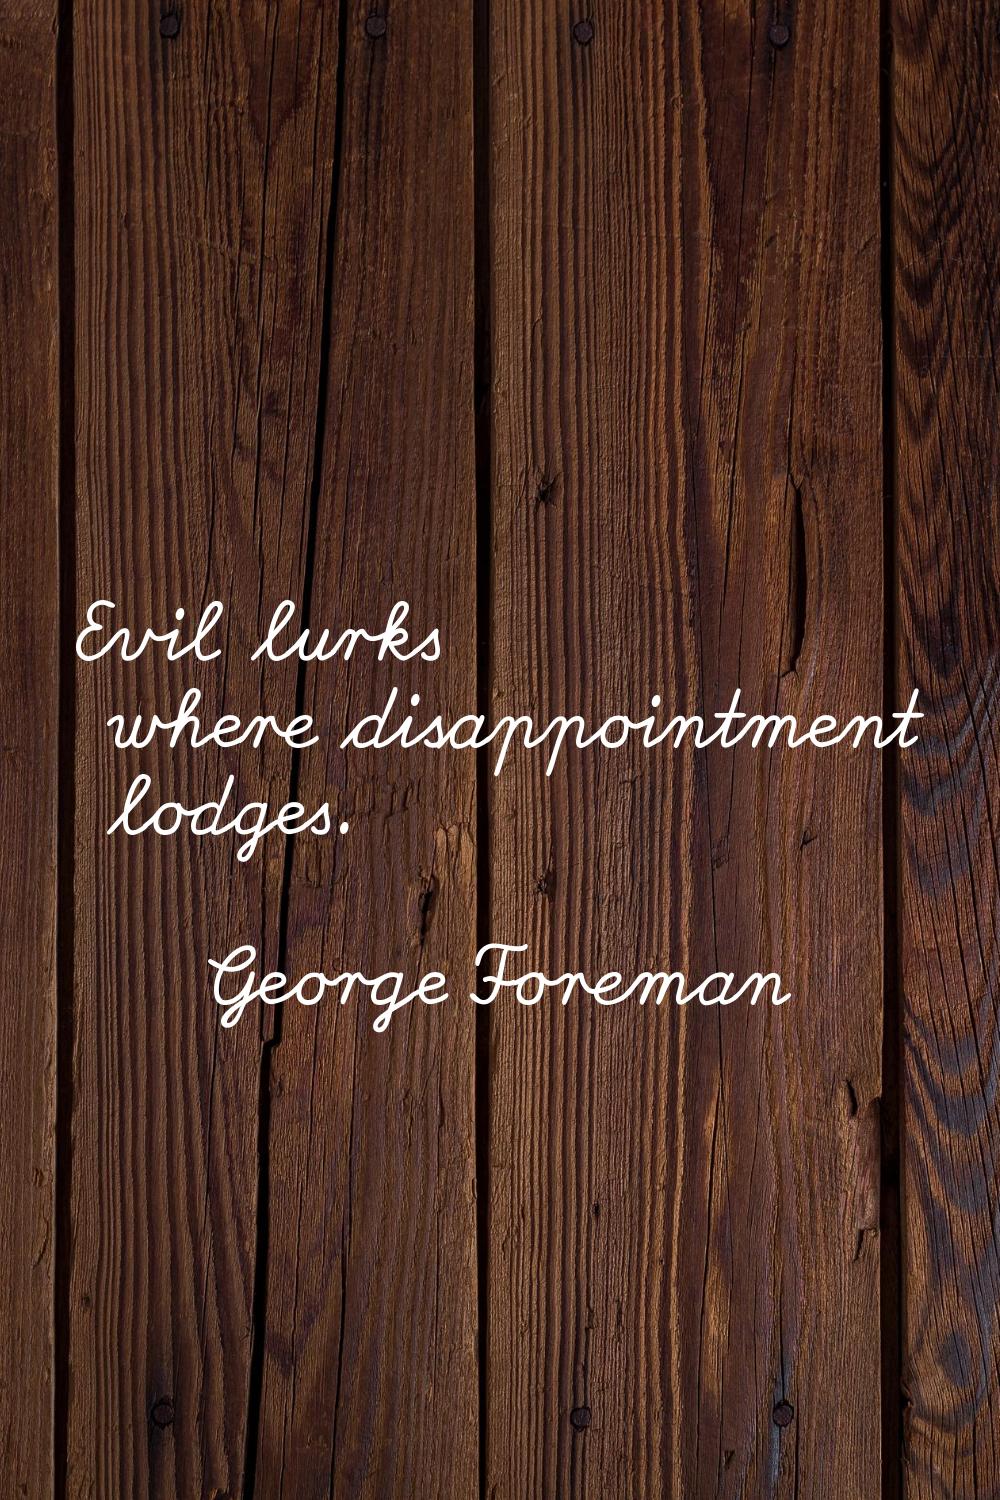 Evil lurks where disappointment lodges.